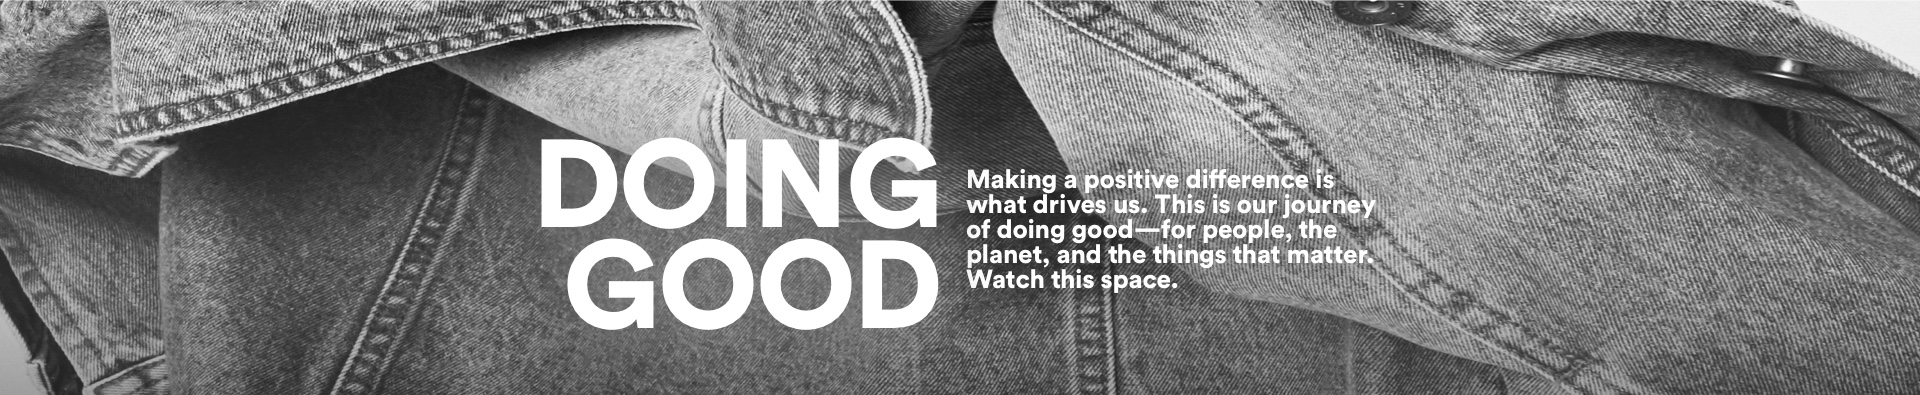 Doing Good. Making a positive difference. Click for more information.